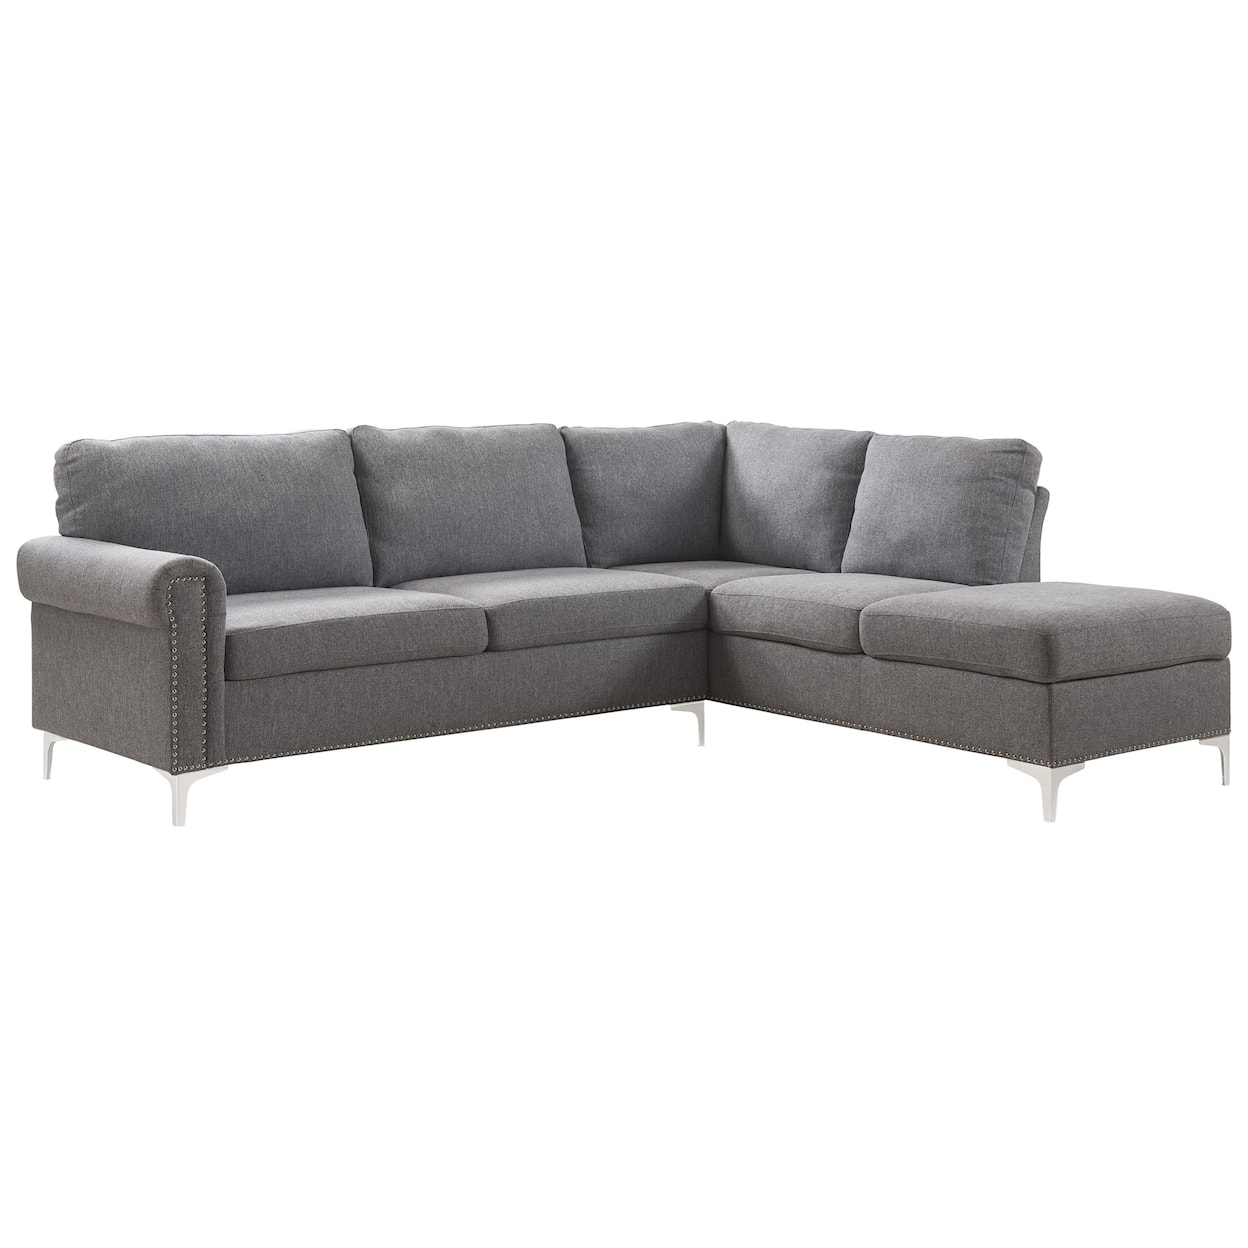 Acme Furniture Melvyn Sectional Sofa